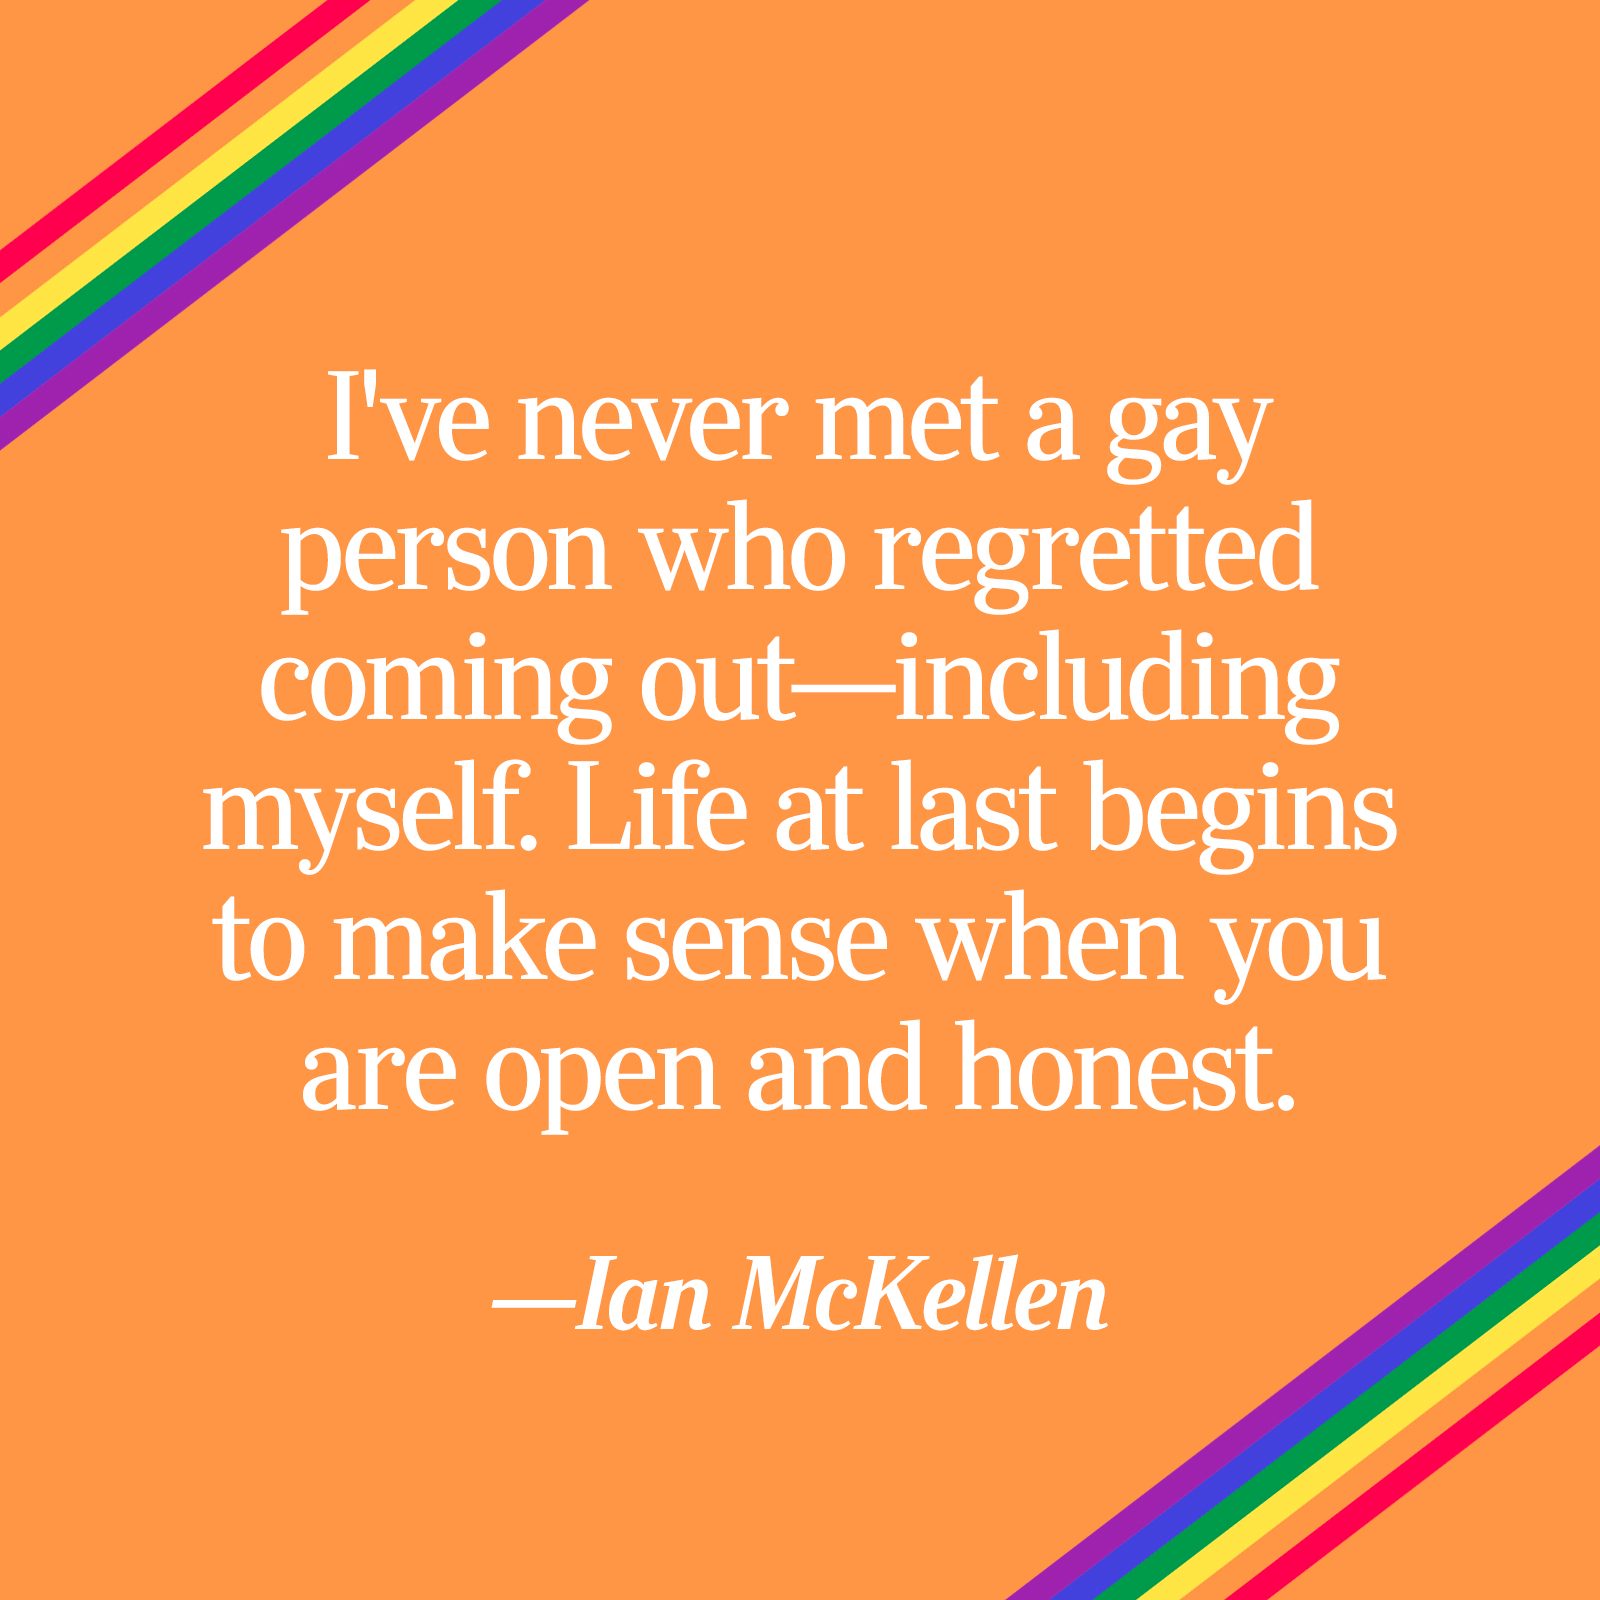 40 LGBTQ Quotes to Celebrate Pride Month 2022 | Powerful Pride Quotes